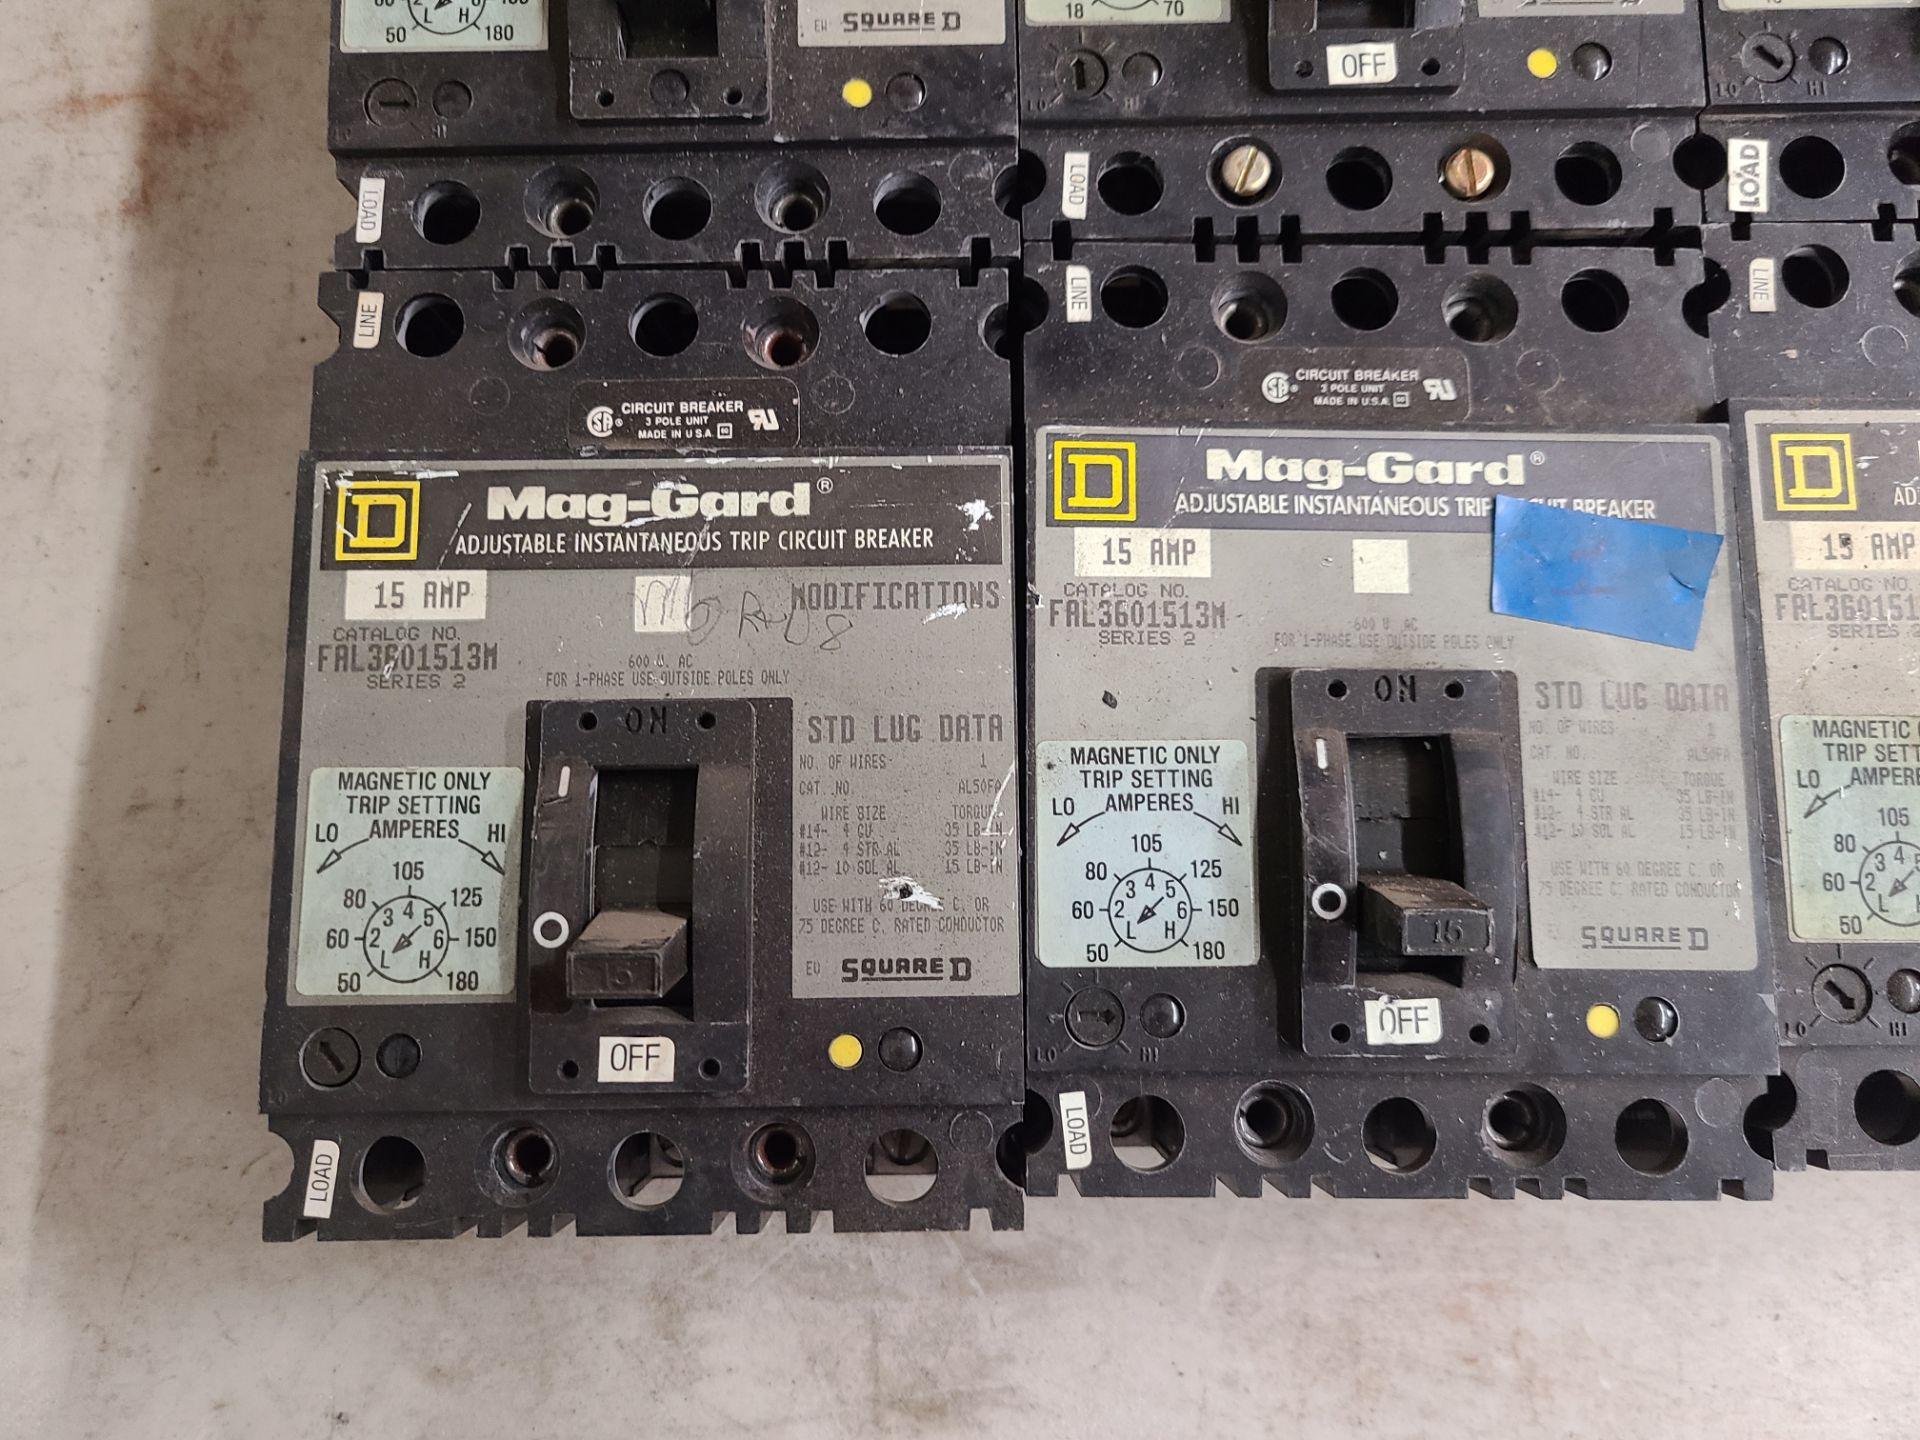 LOT OF SQUARE D MAG-GARD INDUSTRIAL MOLDED CASE CIRCUIT BREAKERS - Image 5 of 11